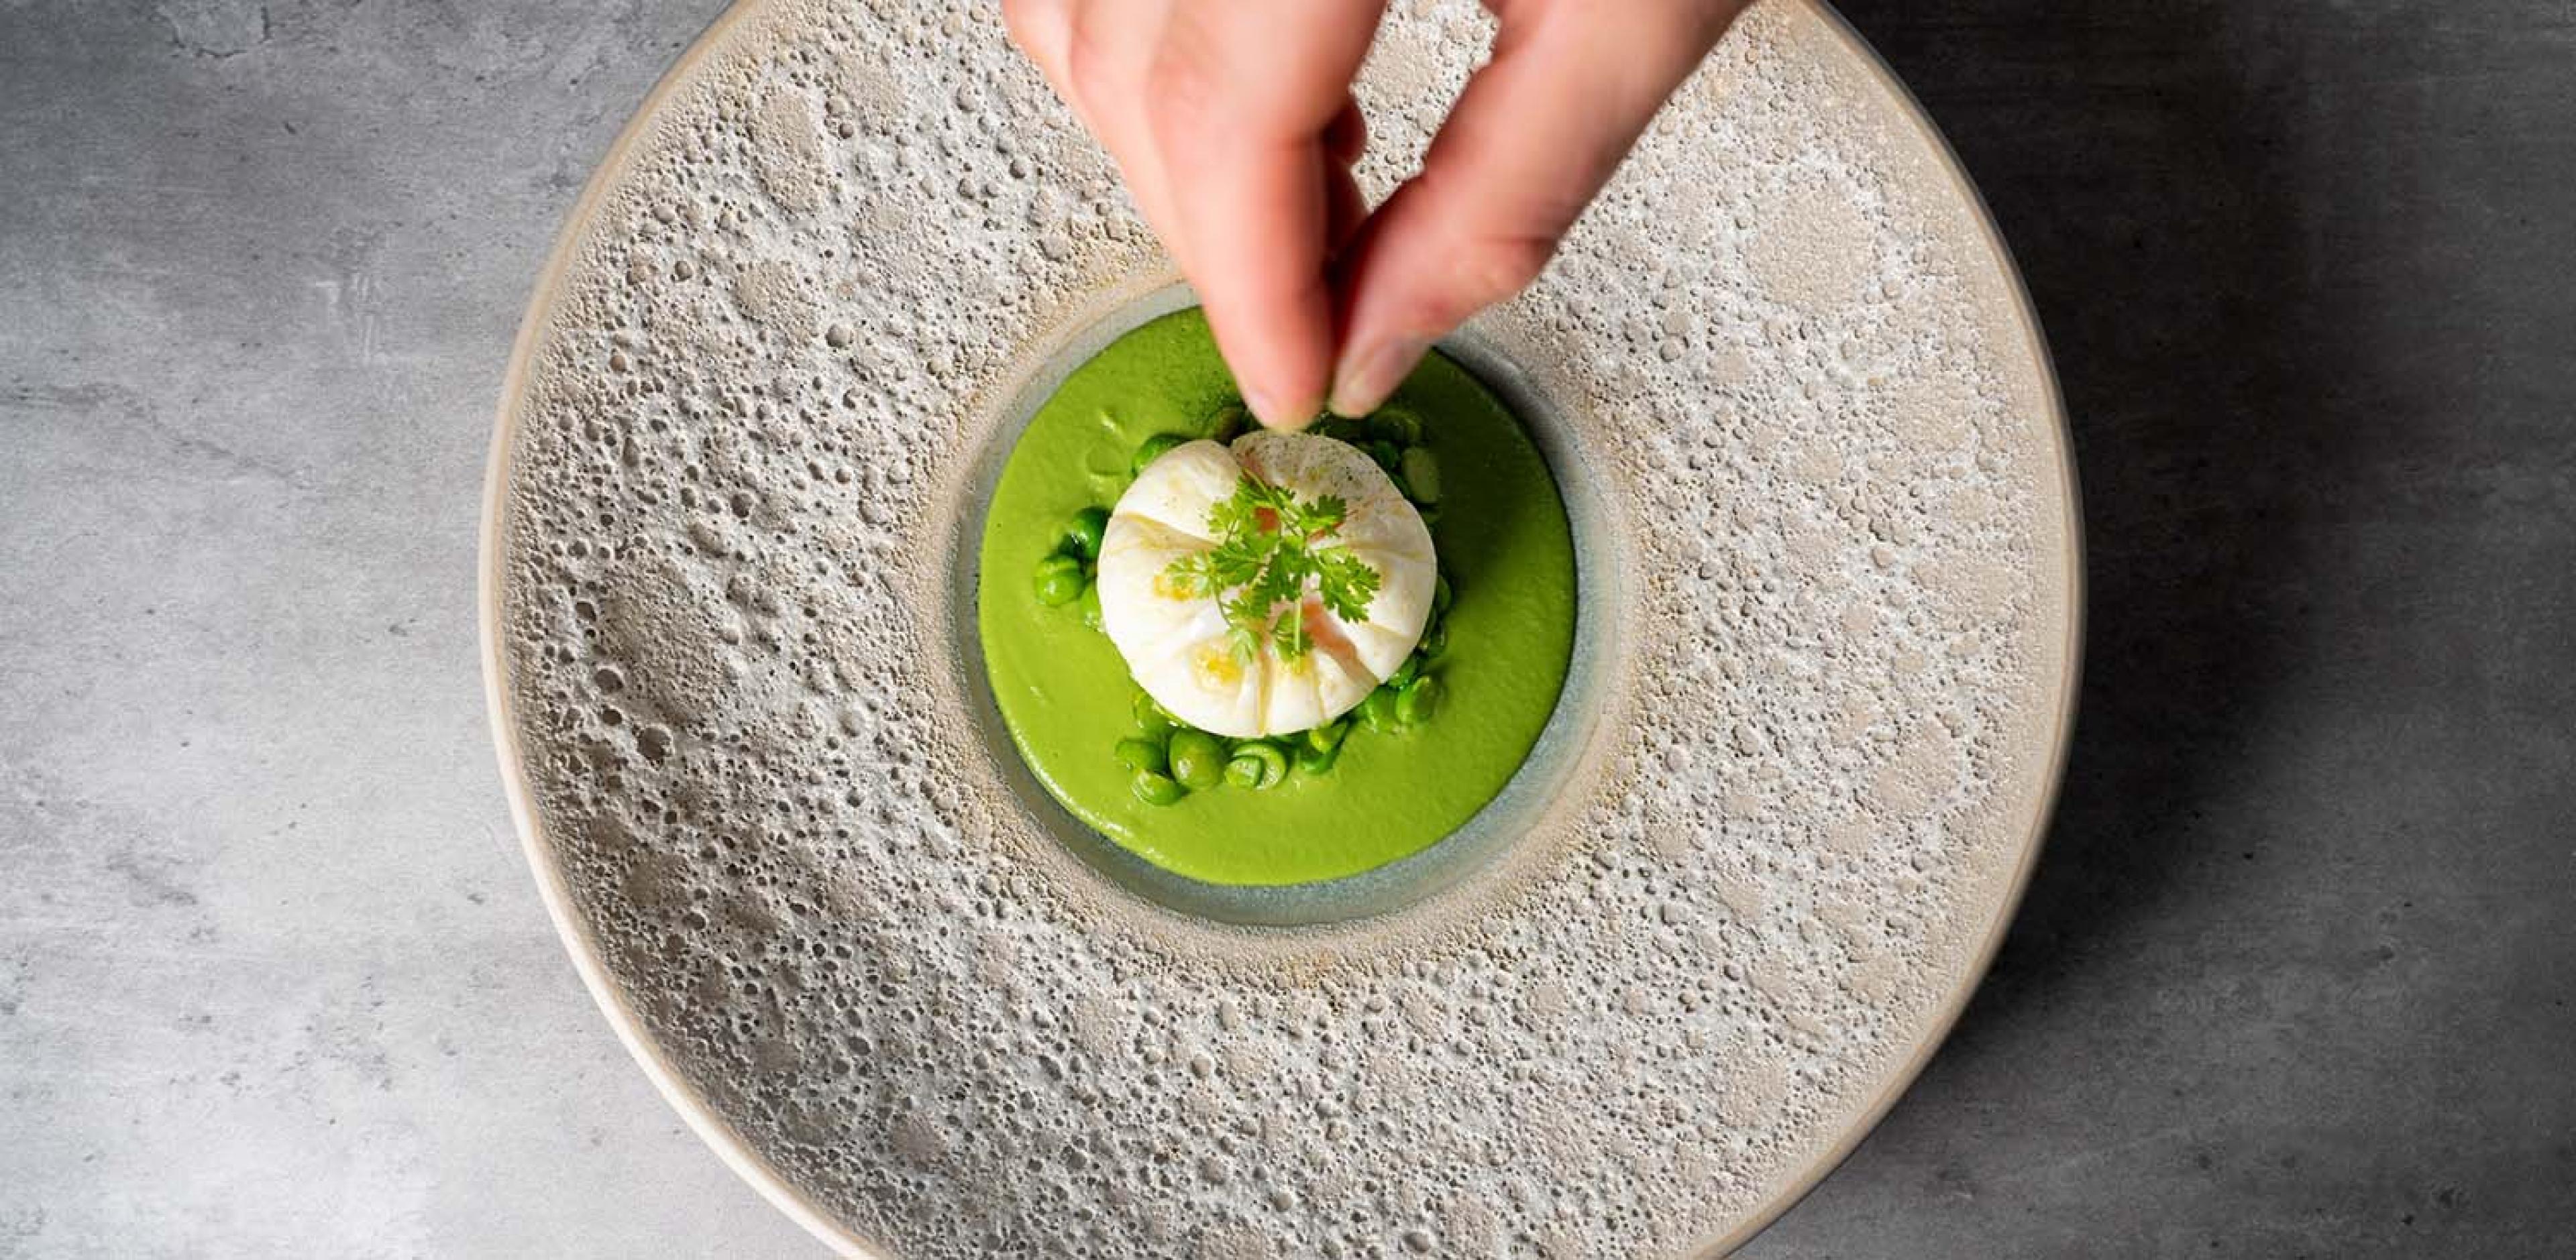 3-Michelin-Star French Restaurant Wants to Be Removed From the Dining Guide  - Eater